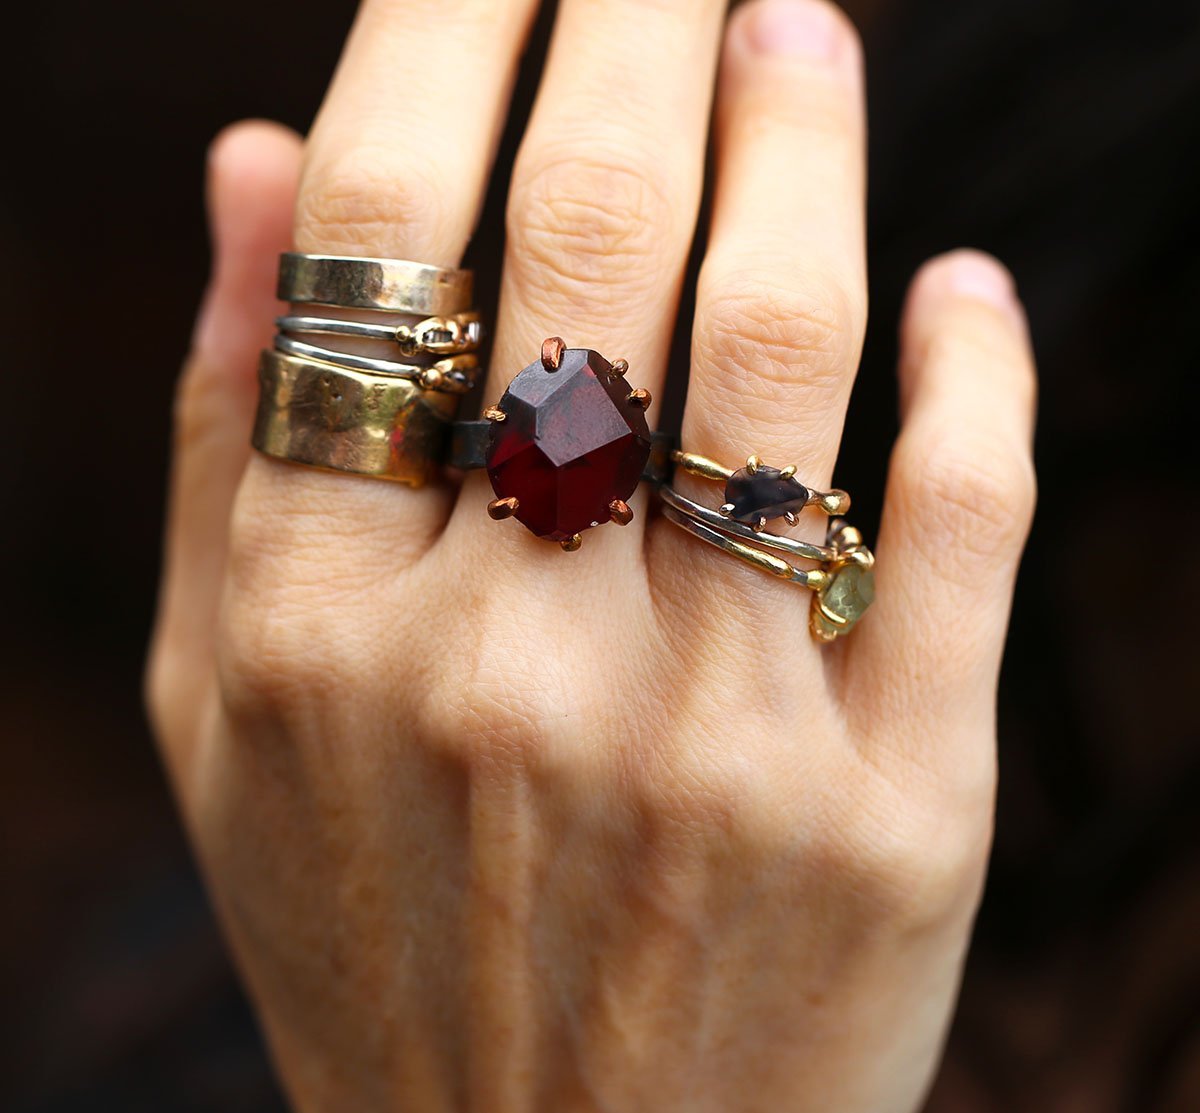 Malawi Garnet large rings with seamed band